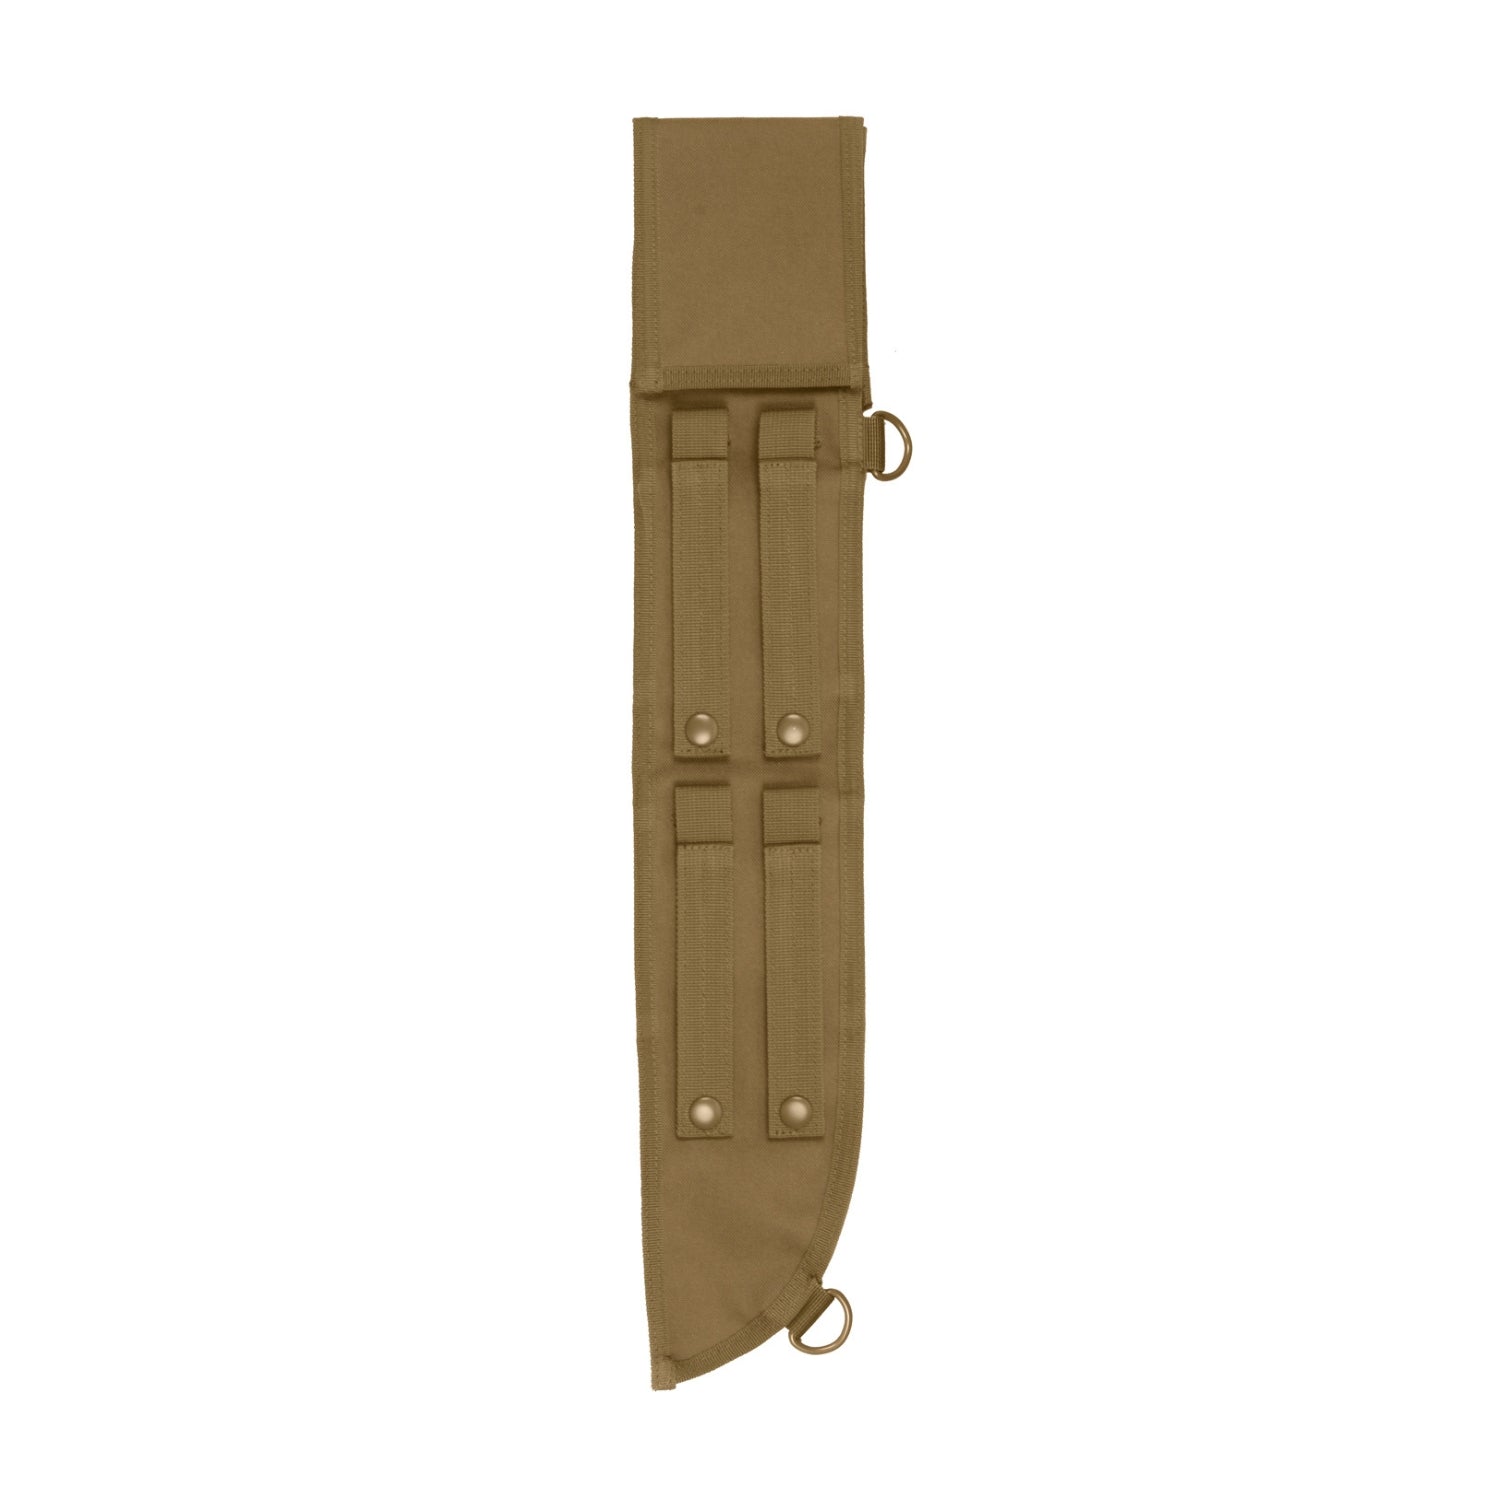 Rothco MOLLE Compatible Machete Sheath 18 Inch | All Security Equipment - 2